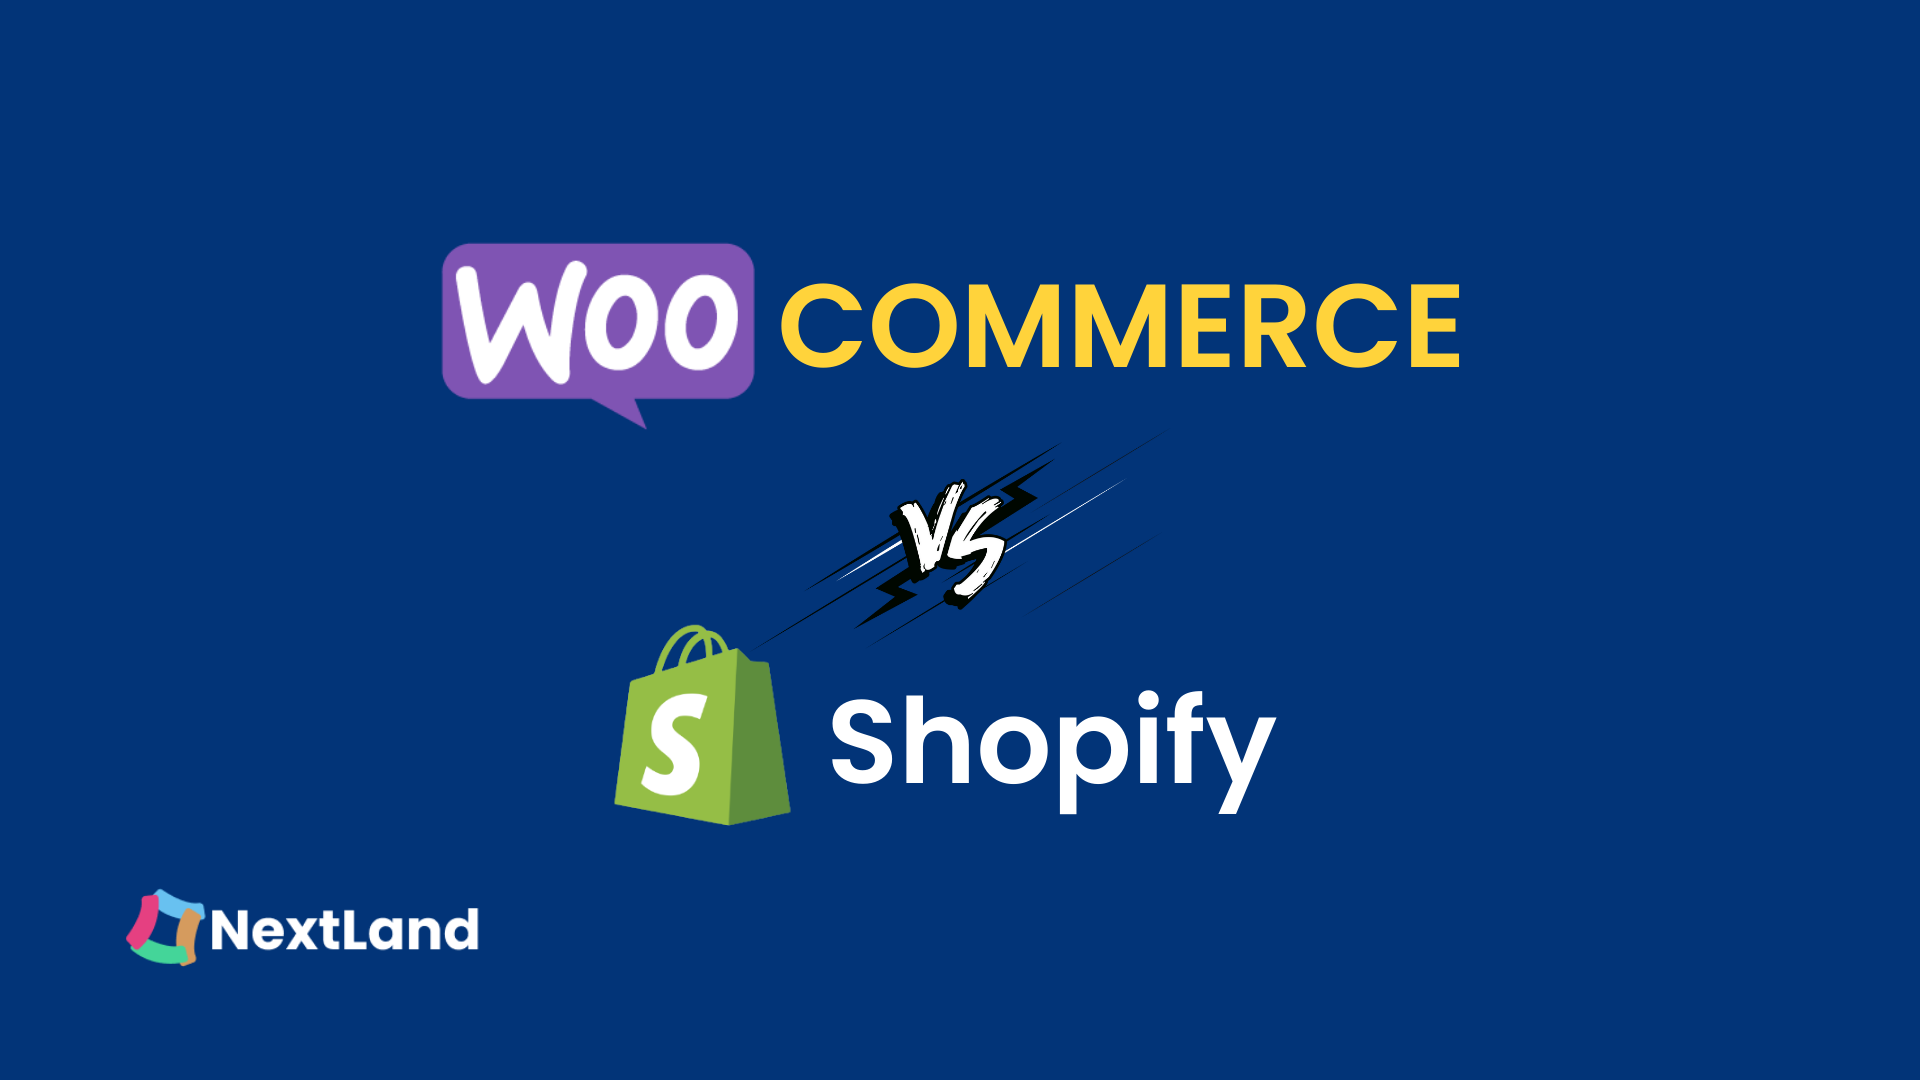  WooCommerce vs. Shopify Which One Is Better? 